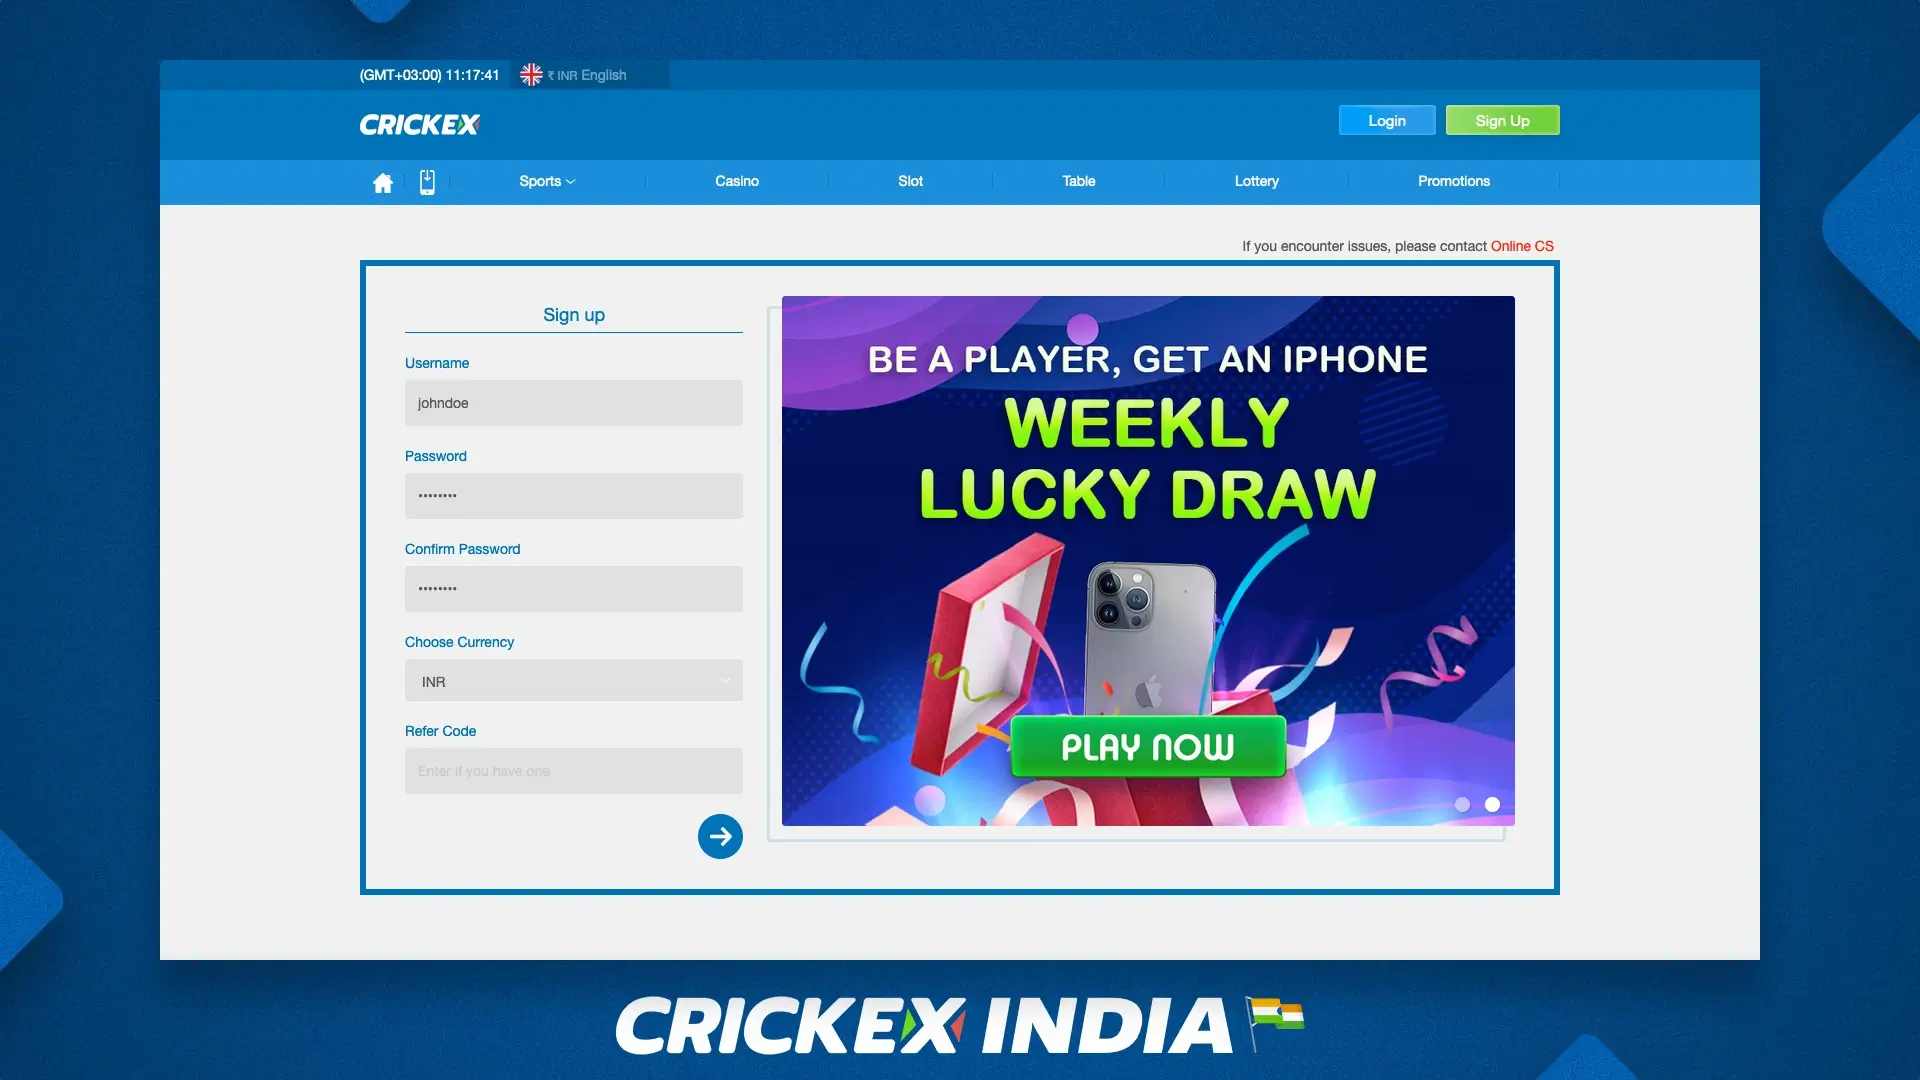 Registration form at Crickex website for new users